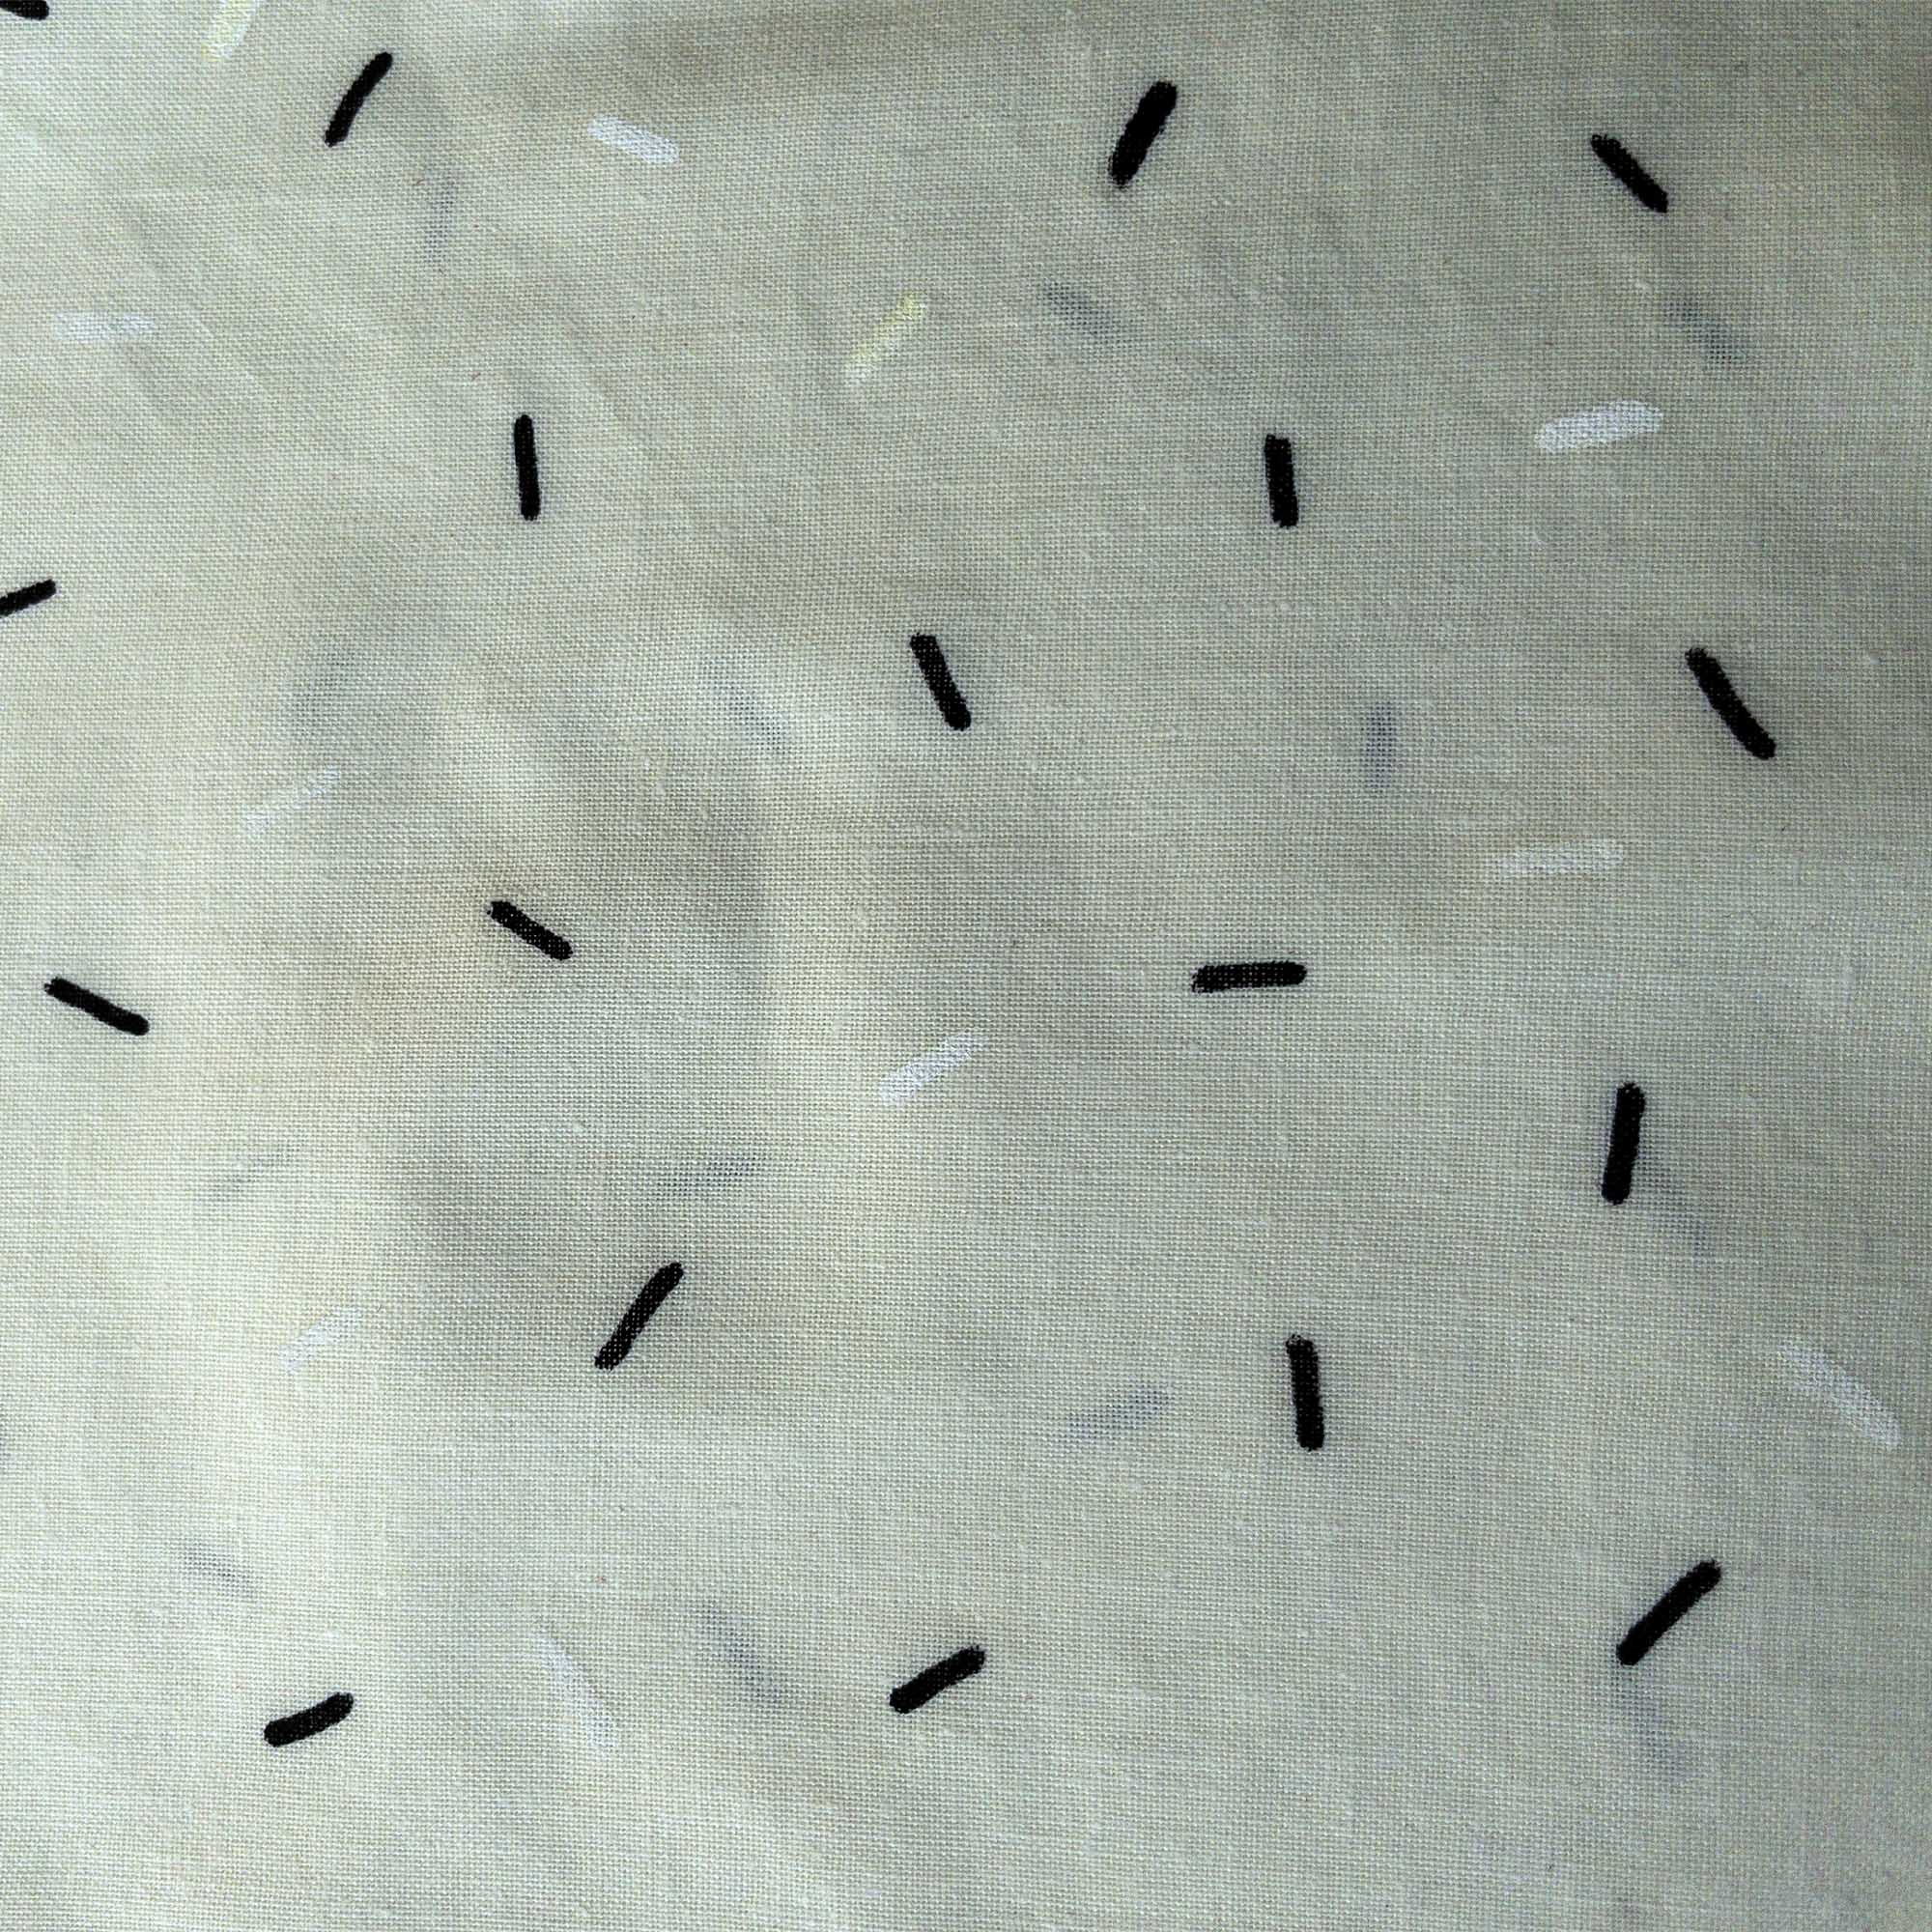 close up of colorful confetti pattern painted with black and white